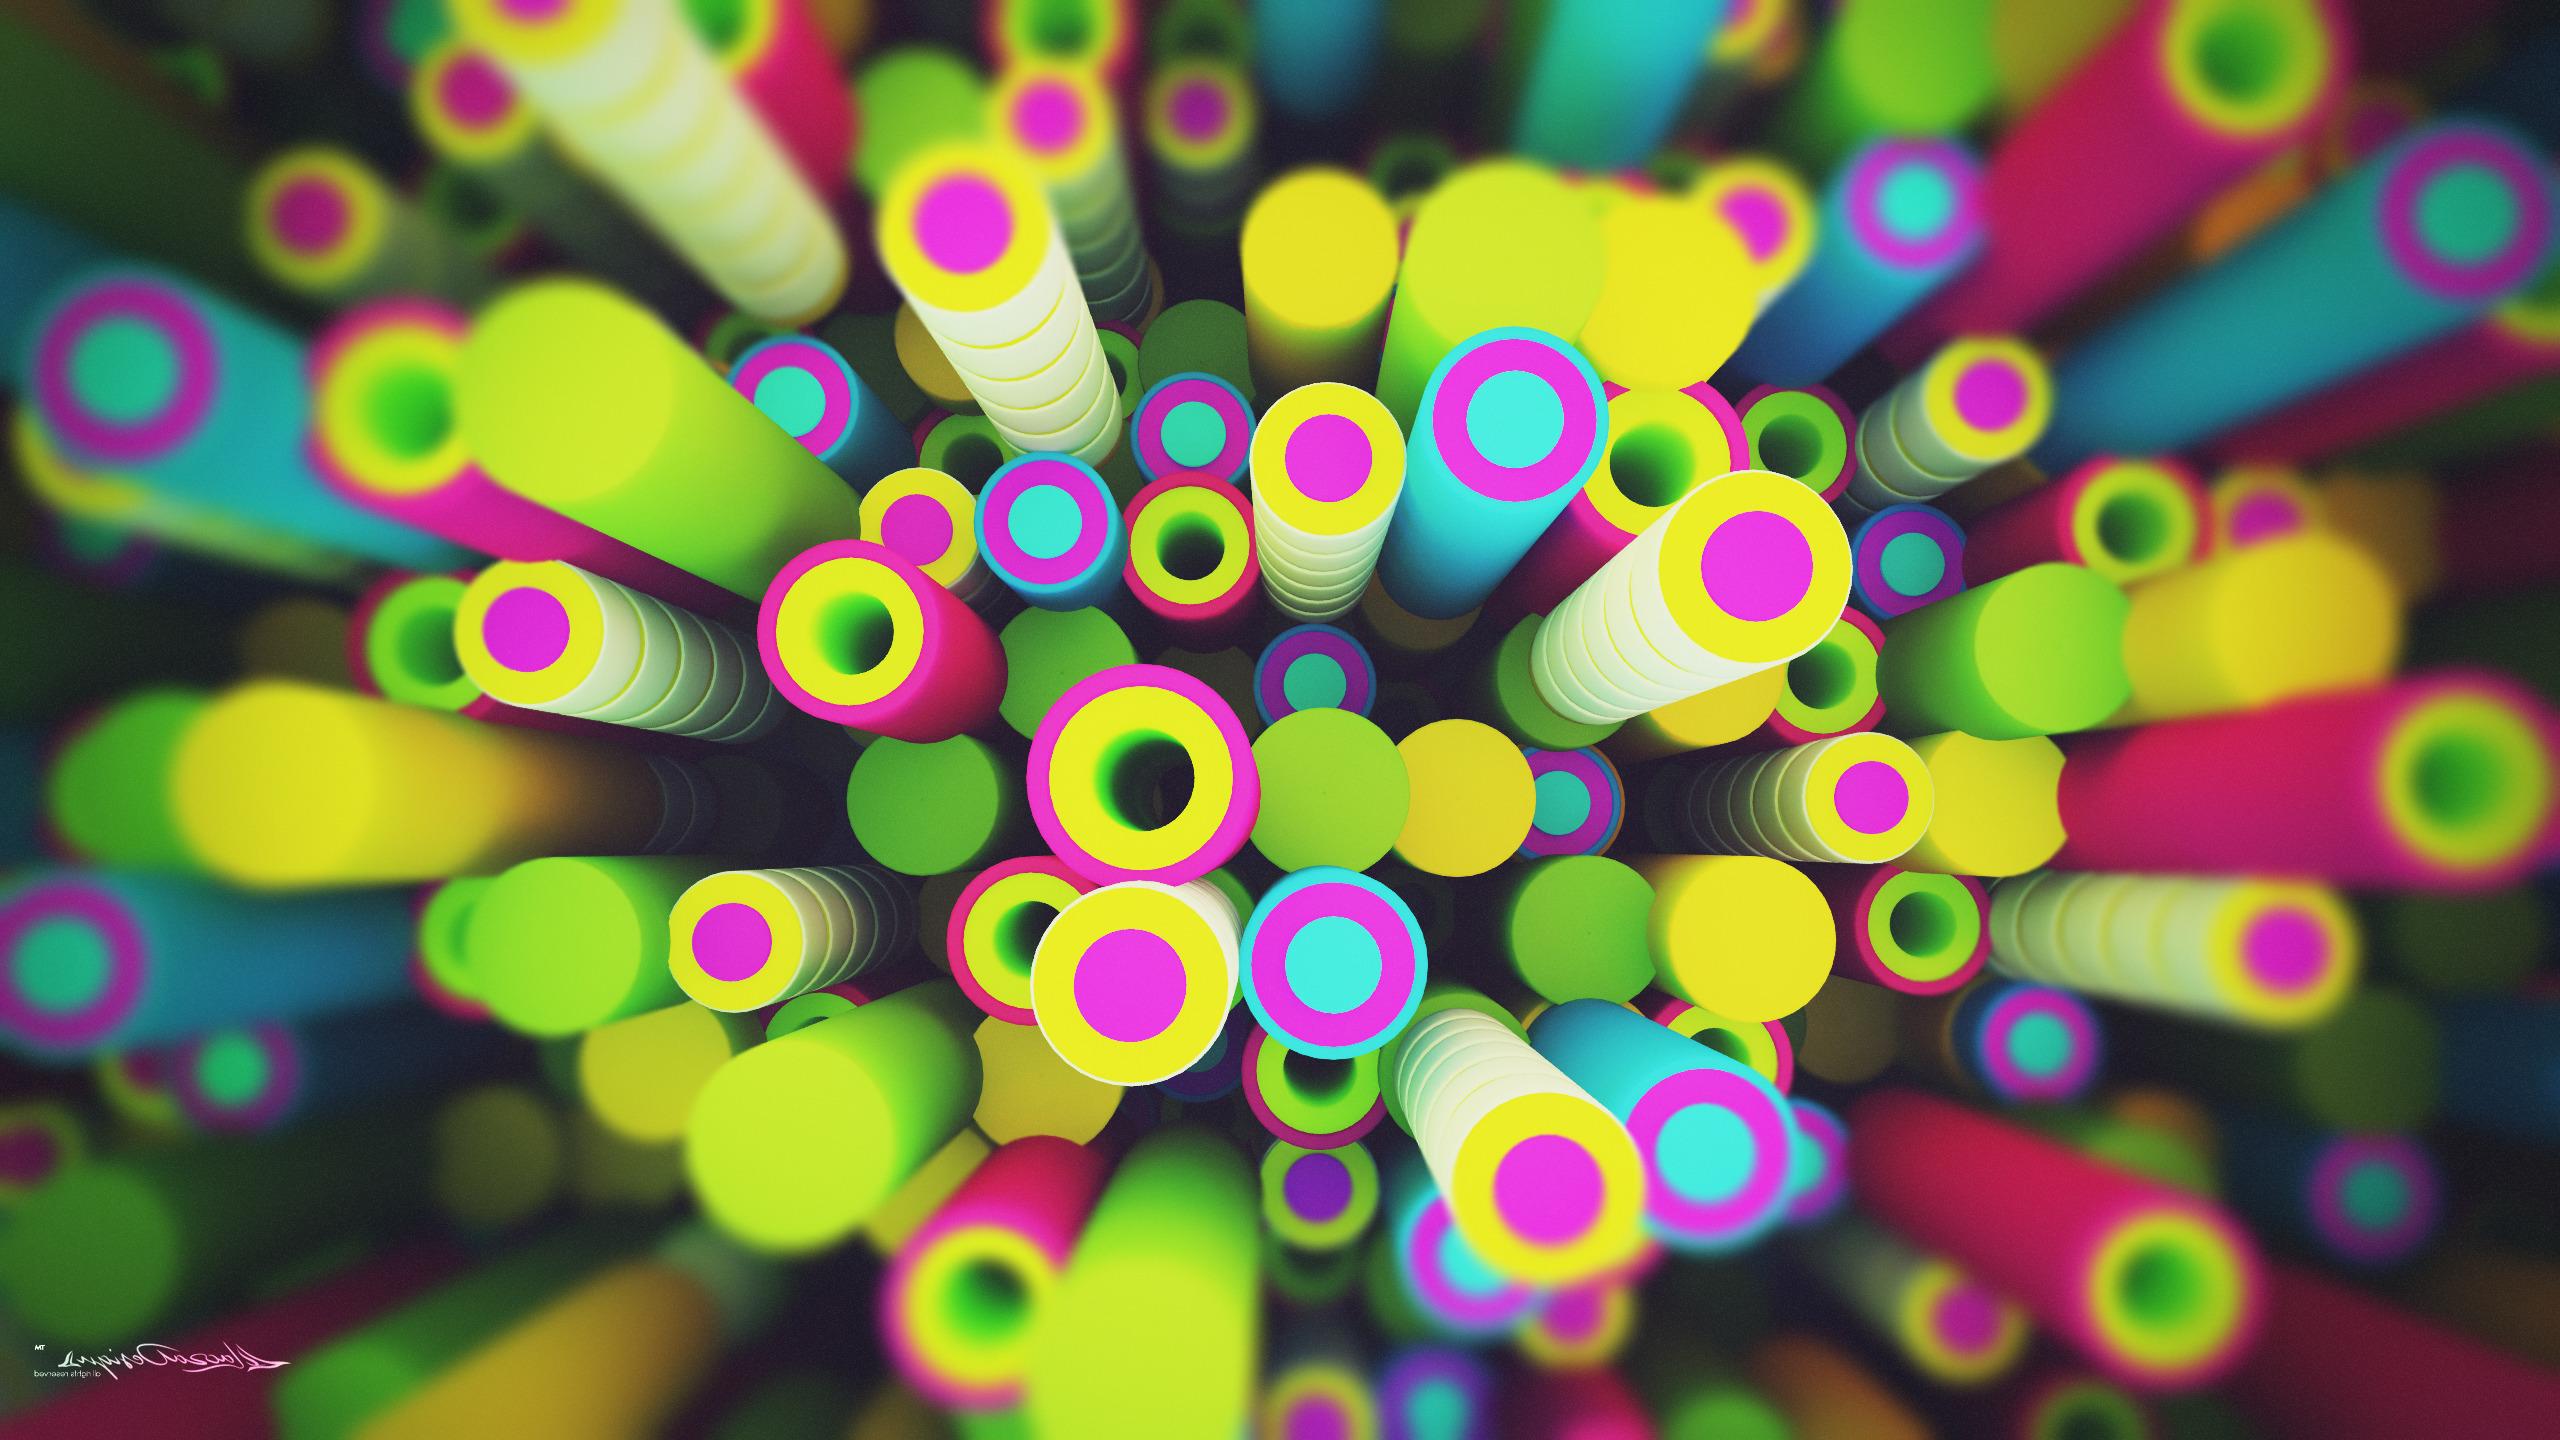 Lacza, Digital Art, Abstract, Sphere, Circle, Colorful, Pipes, 3D